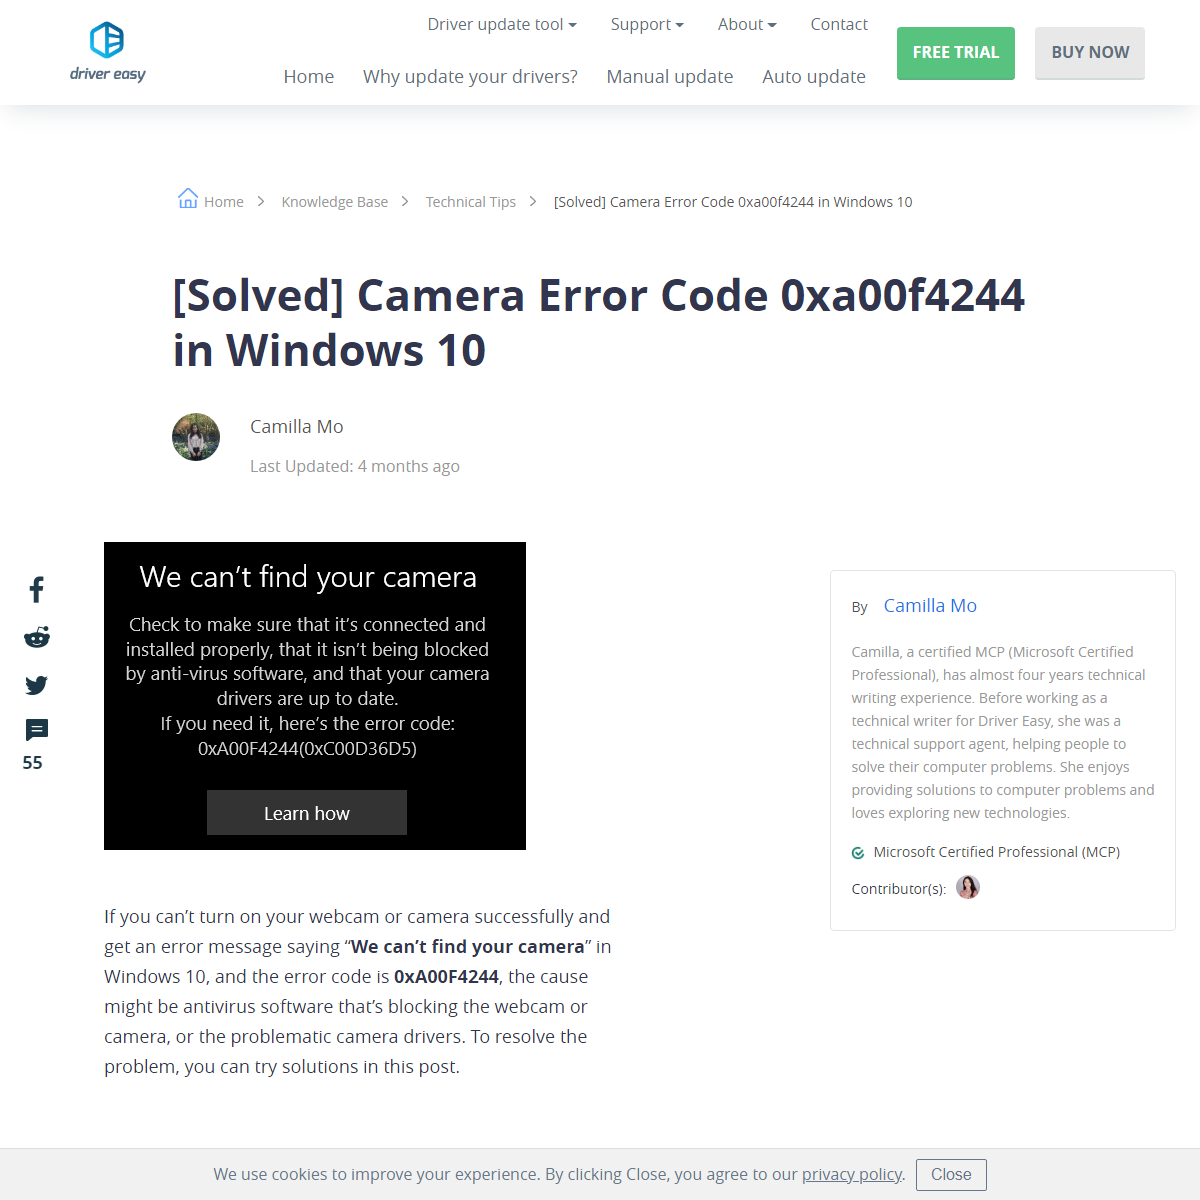 A complete backup of https://www.drivereasy.com/knowledge/fixing-we-cant-find-your-camera-error-code-0xa00f4244/